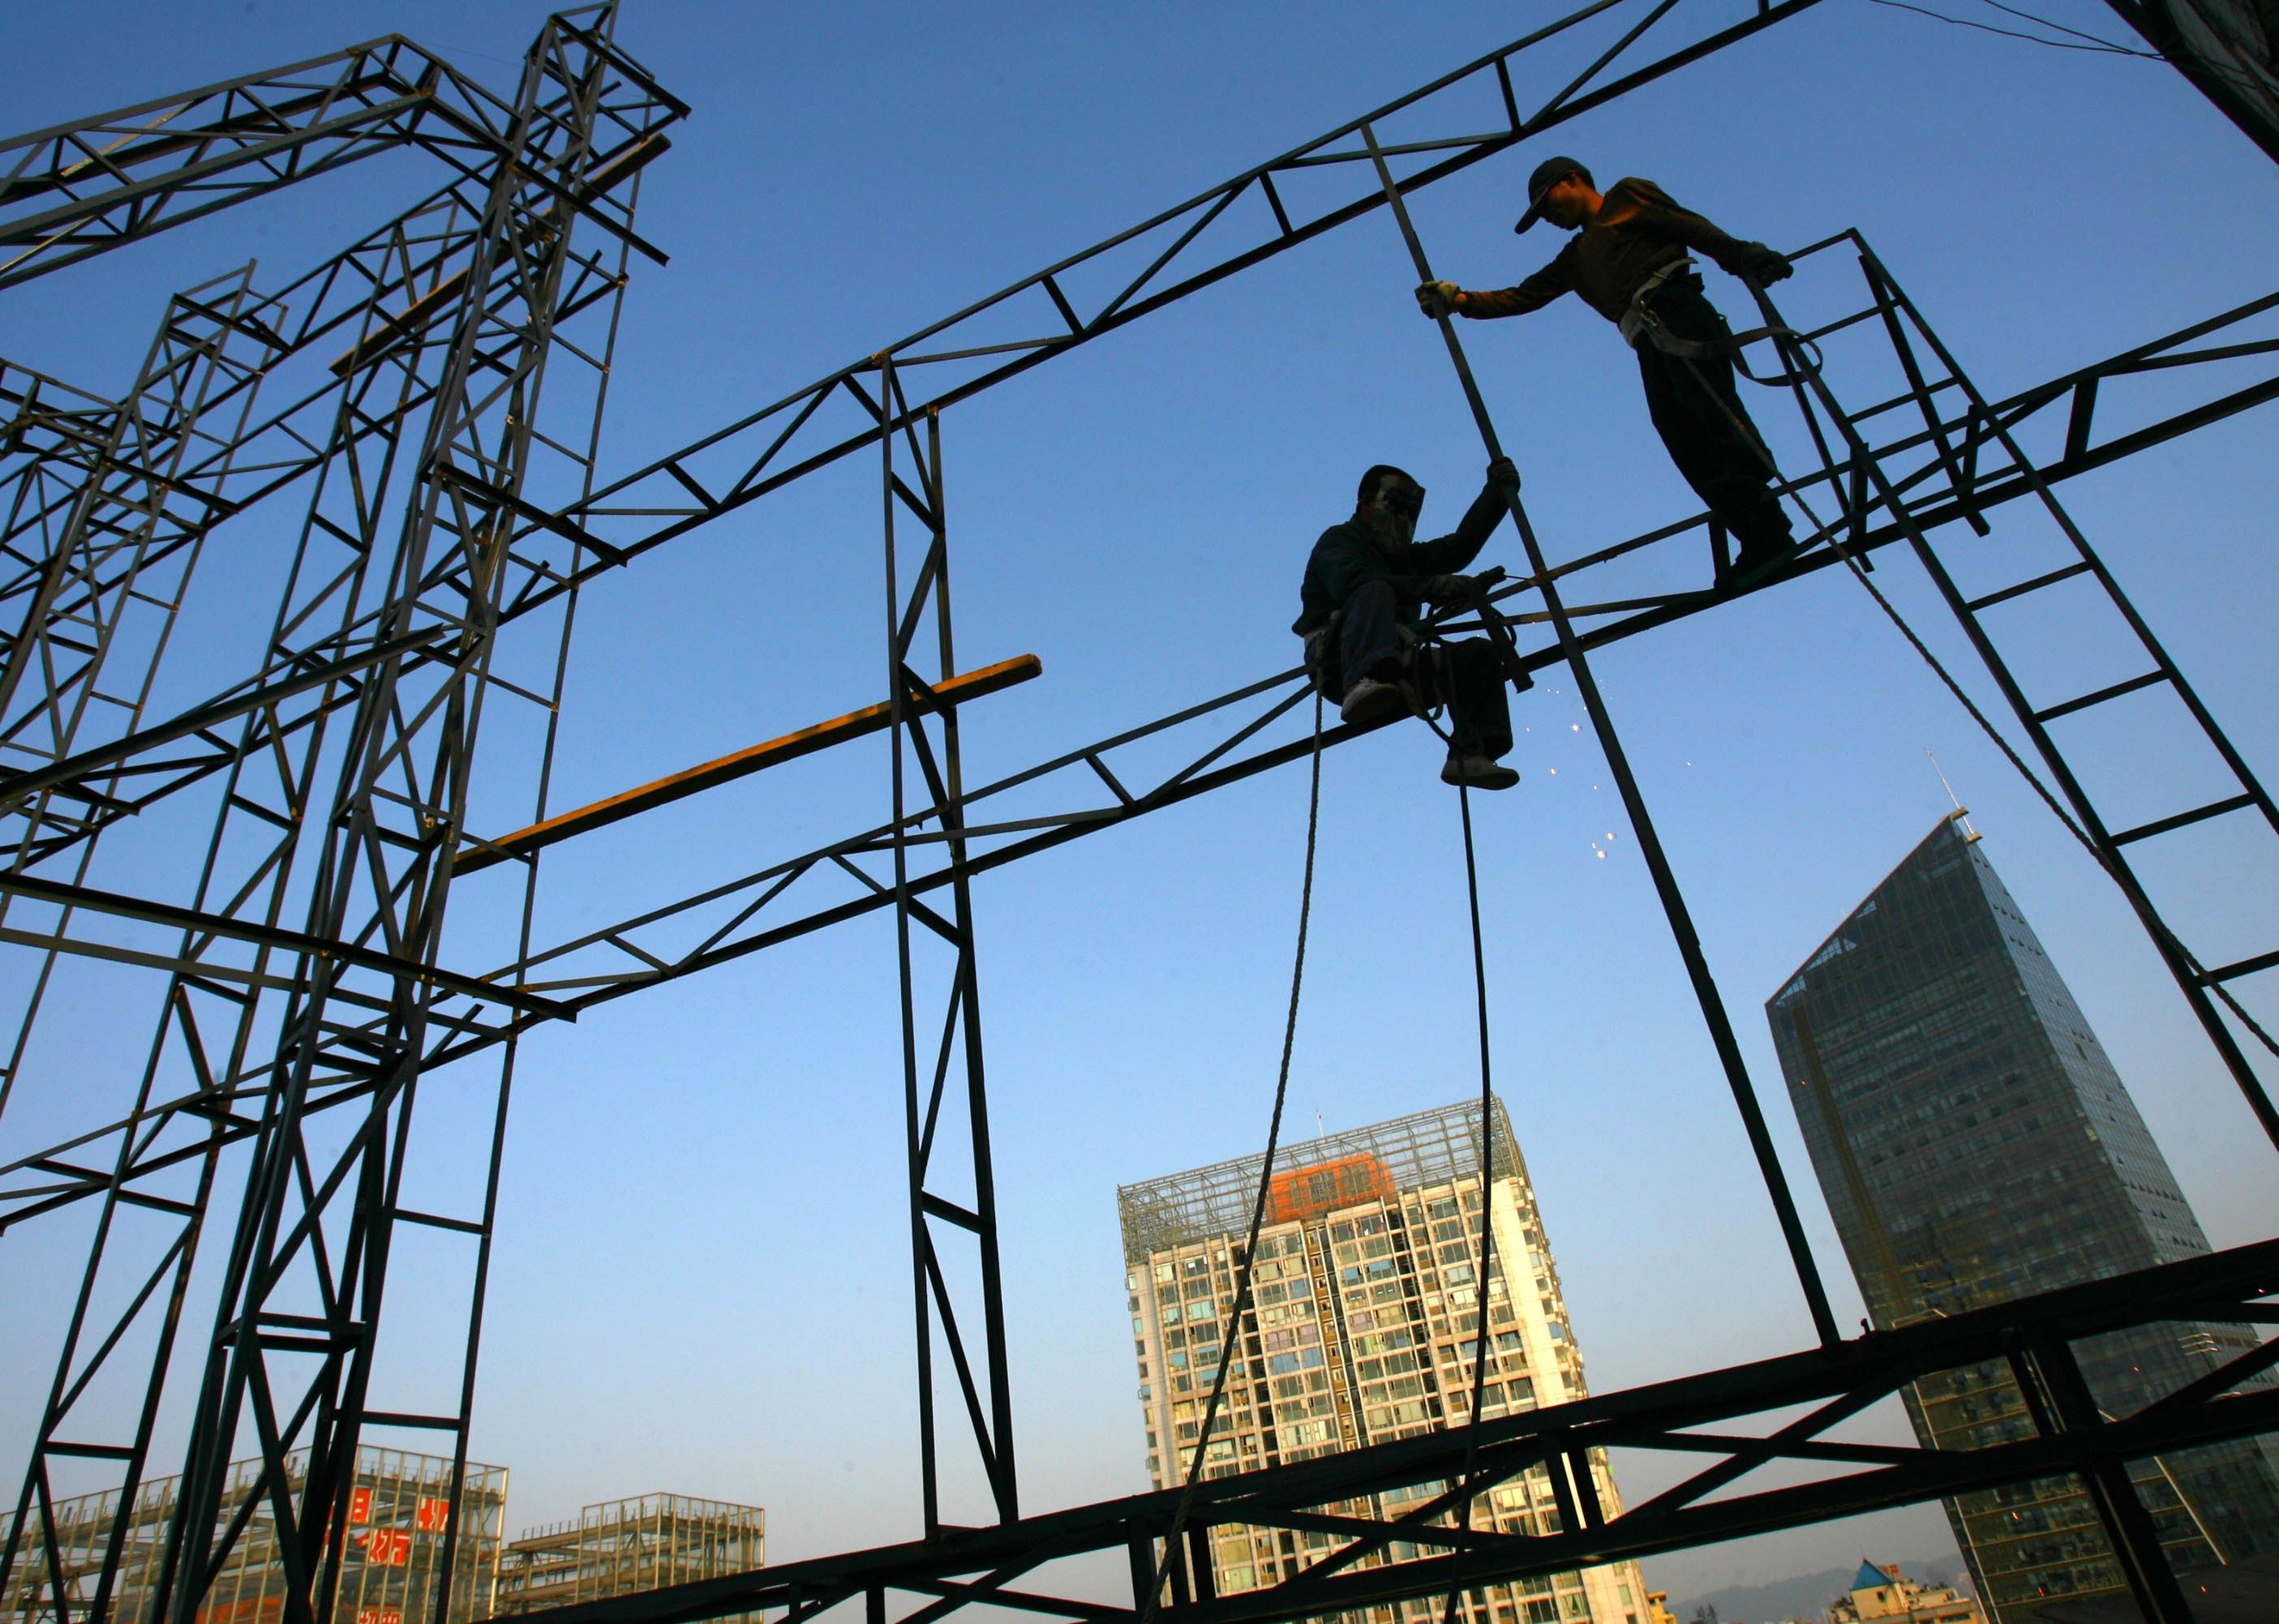 Workers weld on the roof of a building